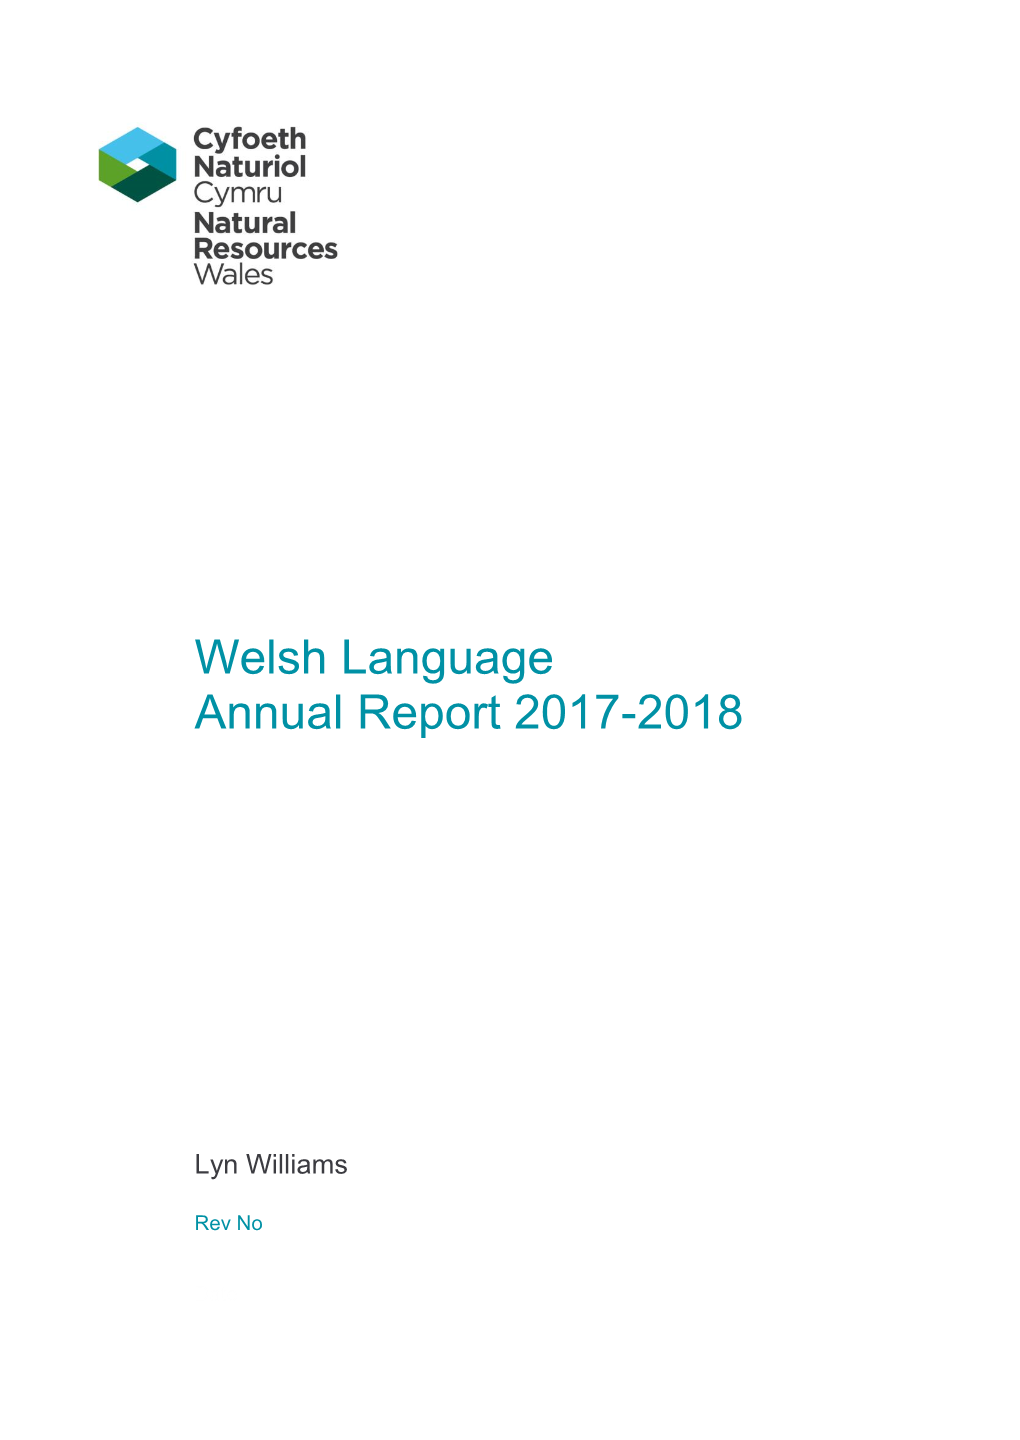 Welsh Language Annual Report 2017-2018